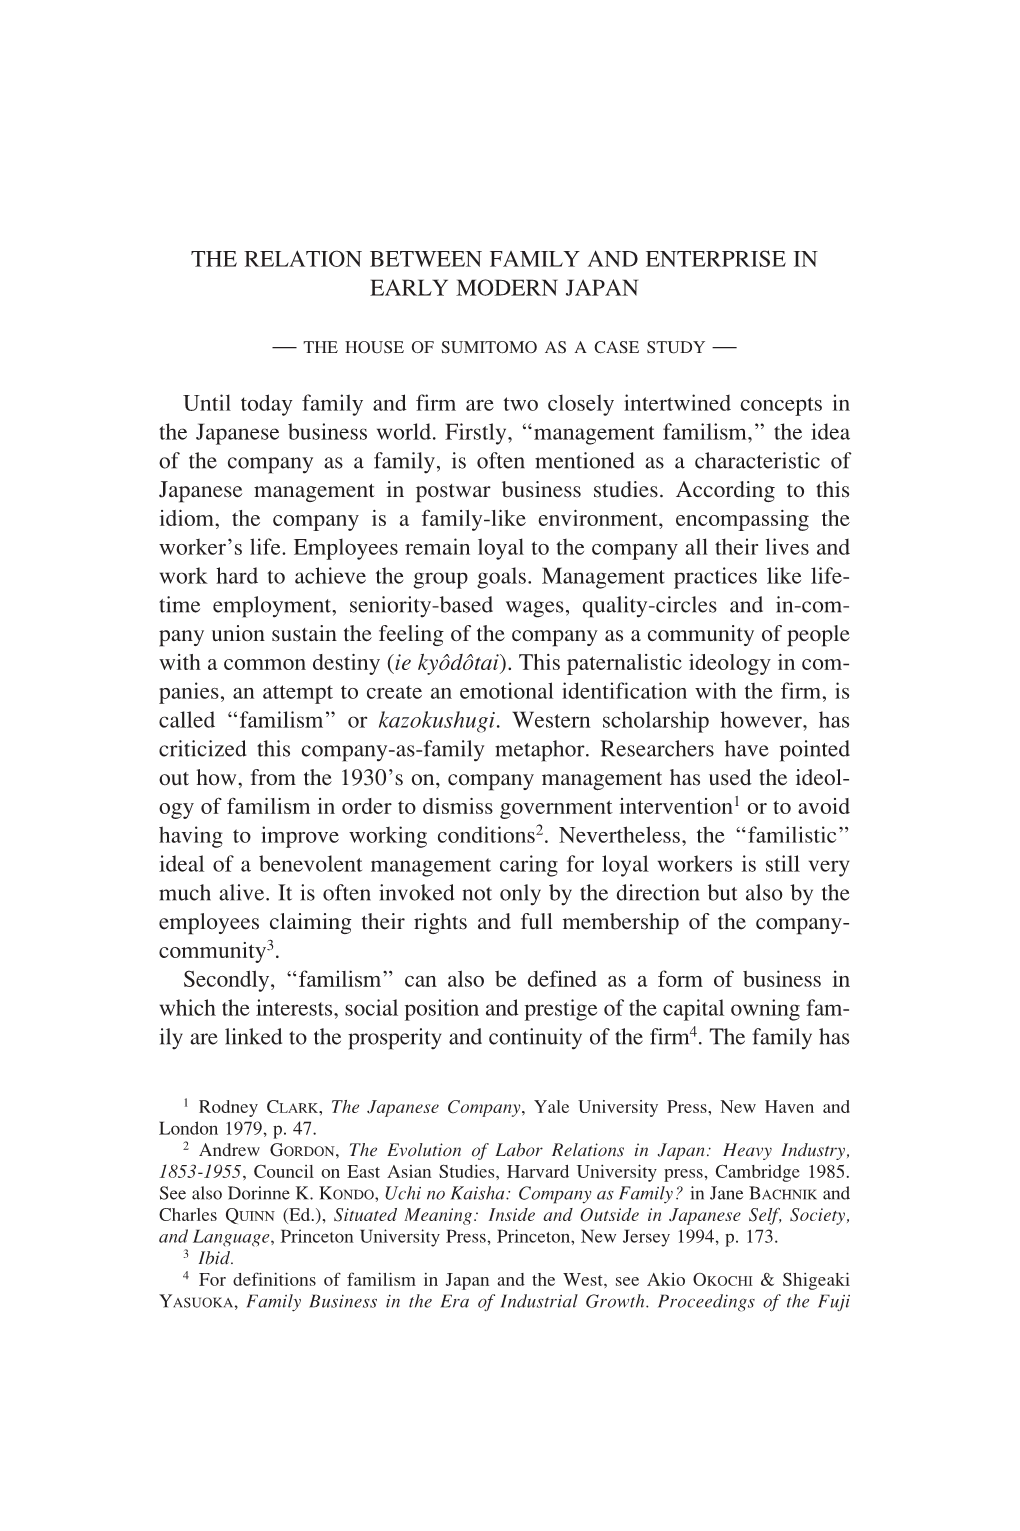 THE RELATION BETWEEN FAMILY and ENTERPRISE in EARLY MODERN JAPAN Until Today Family and Firm Are Two Closely Intertwined Concept